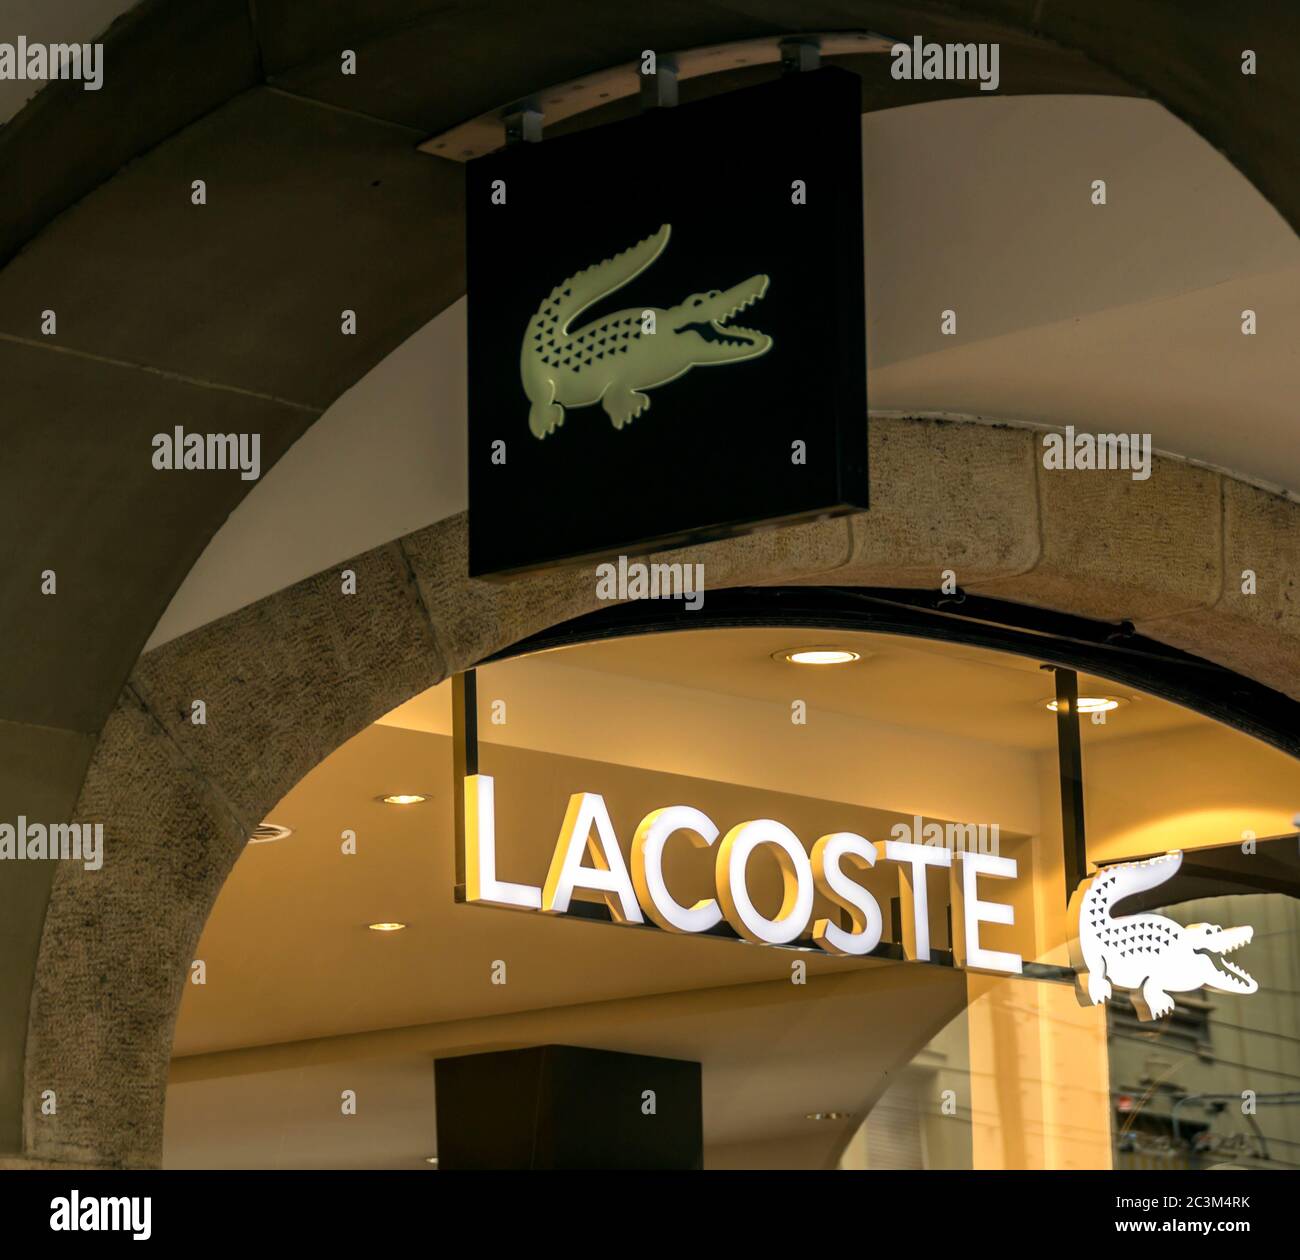 Bern, Switzerland - Lacoste shop. Lacoste is a French clothing company, founded in 1933 by tennis player René Lacoste and André Gillier. Stock Photo